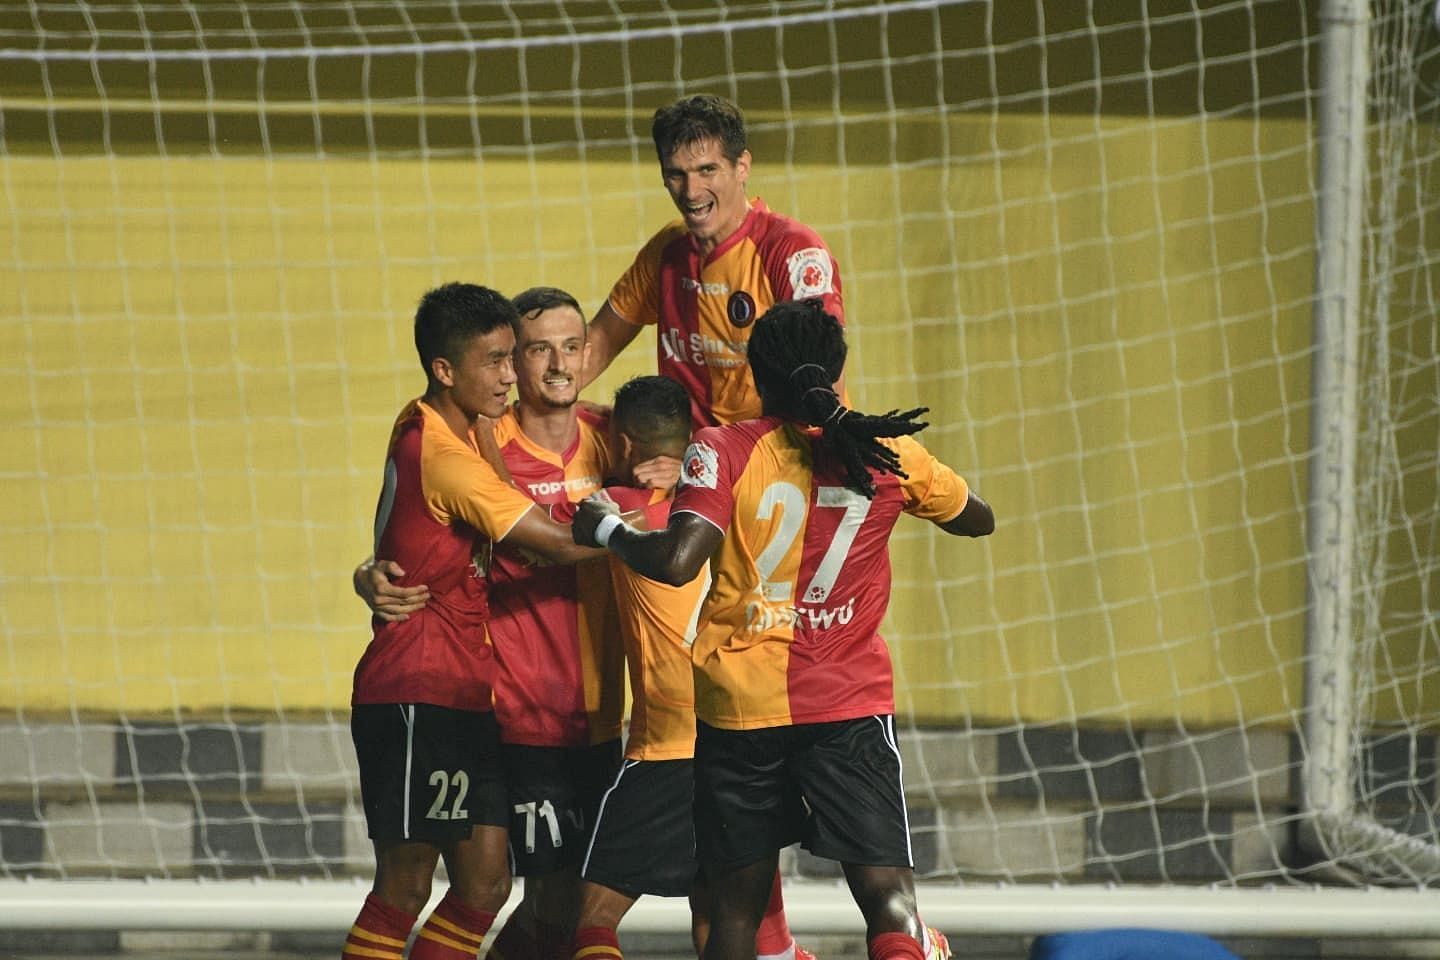 East Bengal scored their first goal of the season from a corner.(Image Courtesy: East Bengal social media)